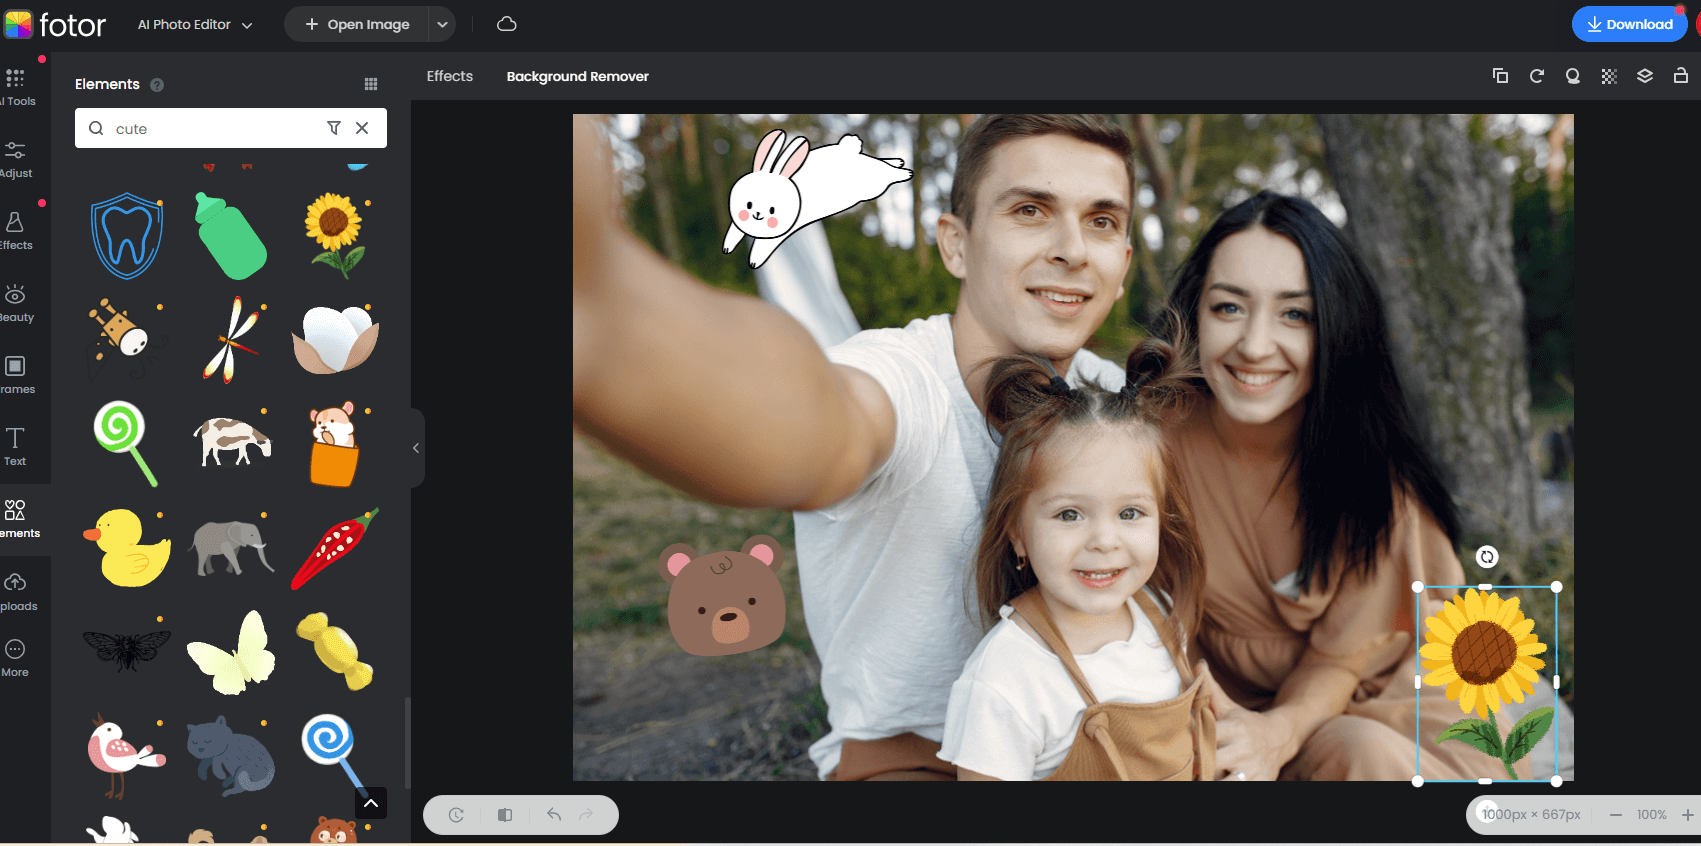 add cute stickers to the family photo in fotor